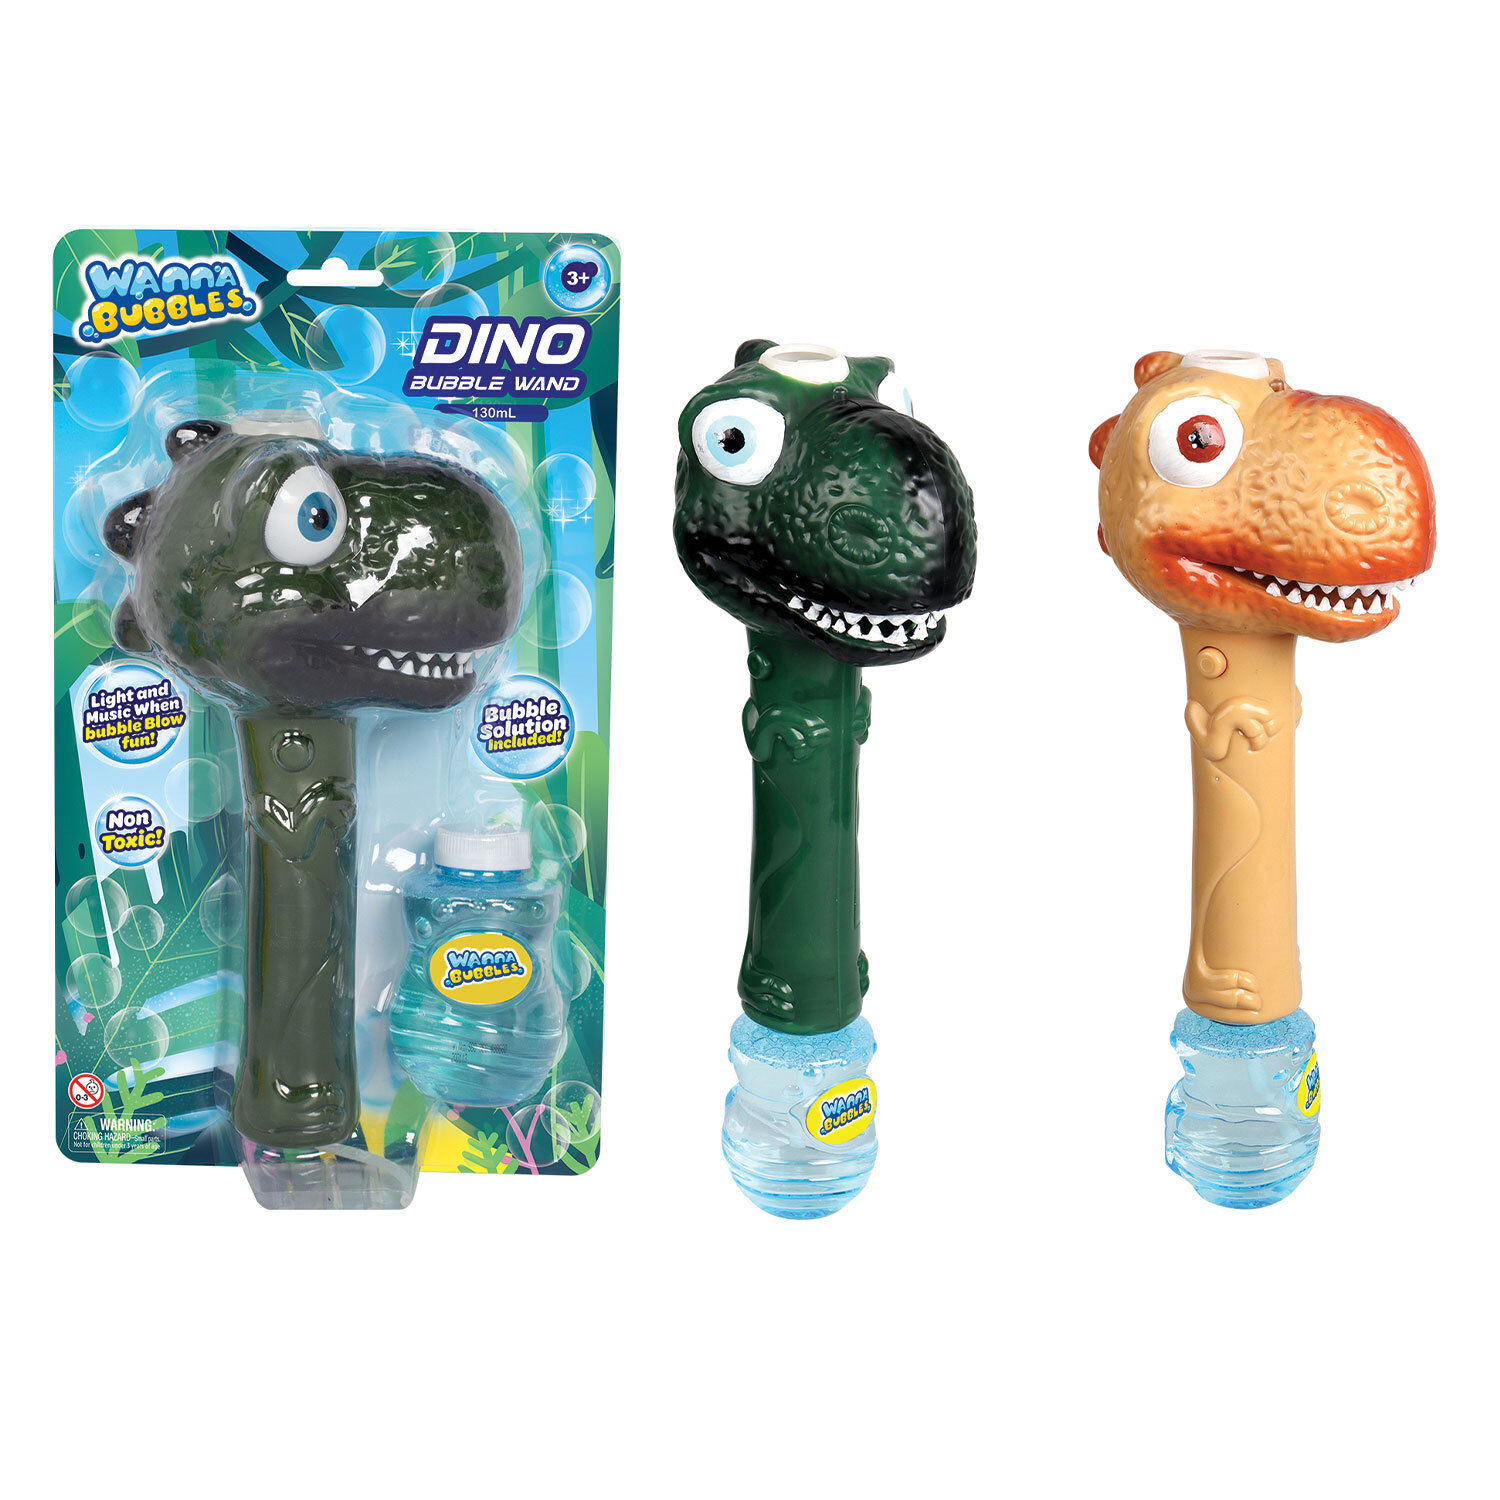 Single Wanna Bubbles Dino Bubble Wand in Assorted styles Image